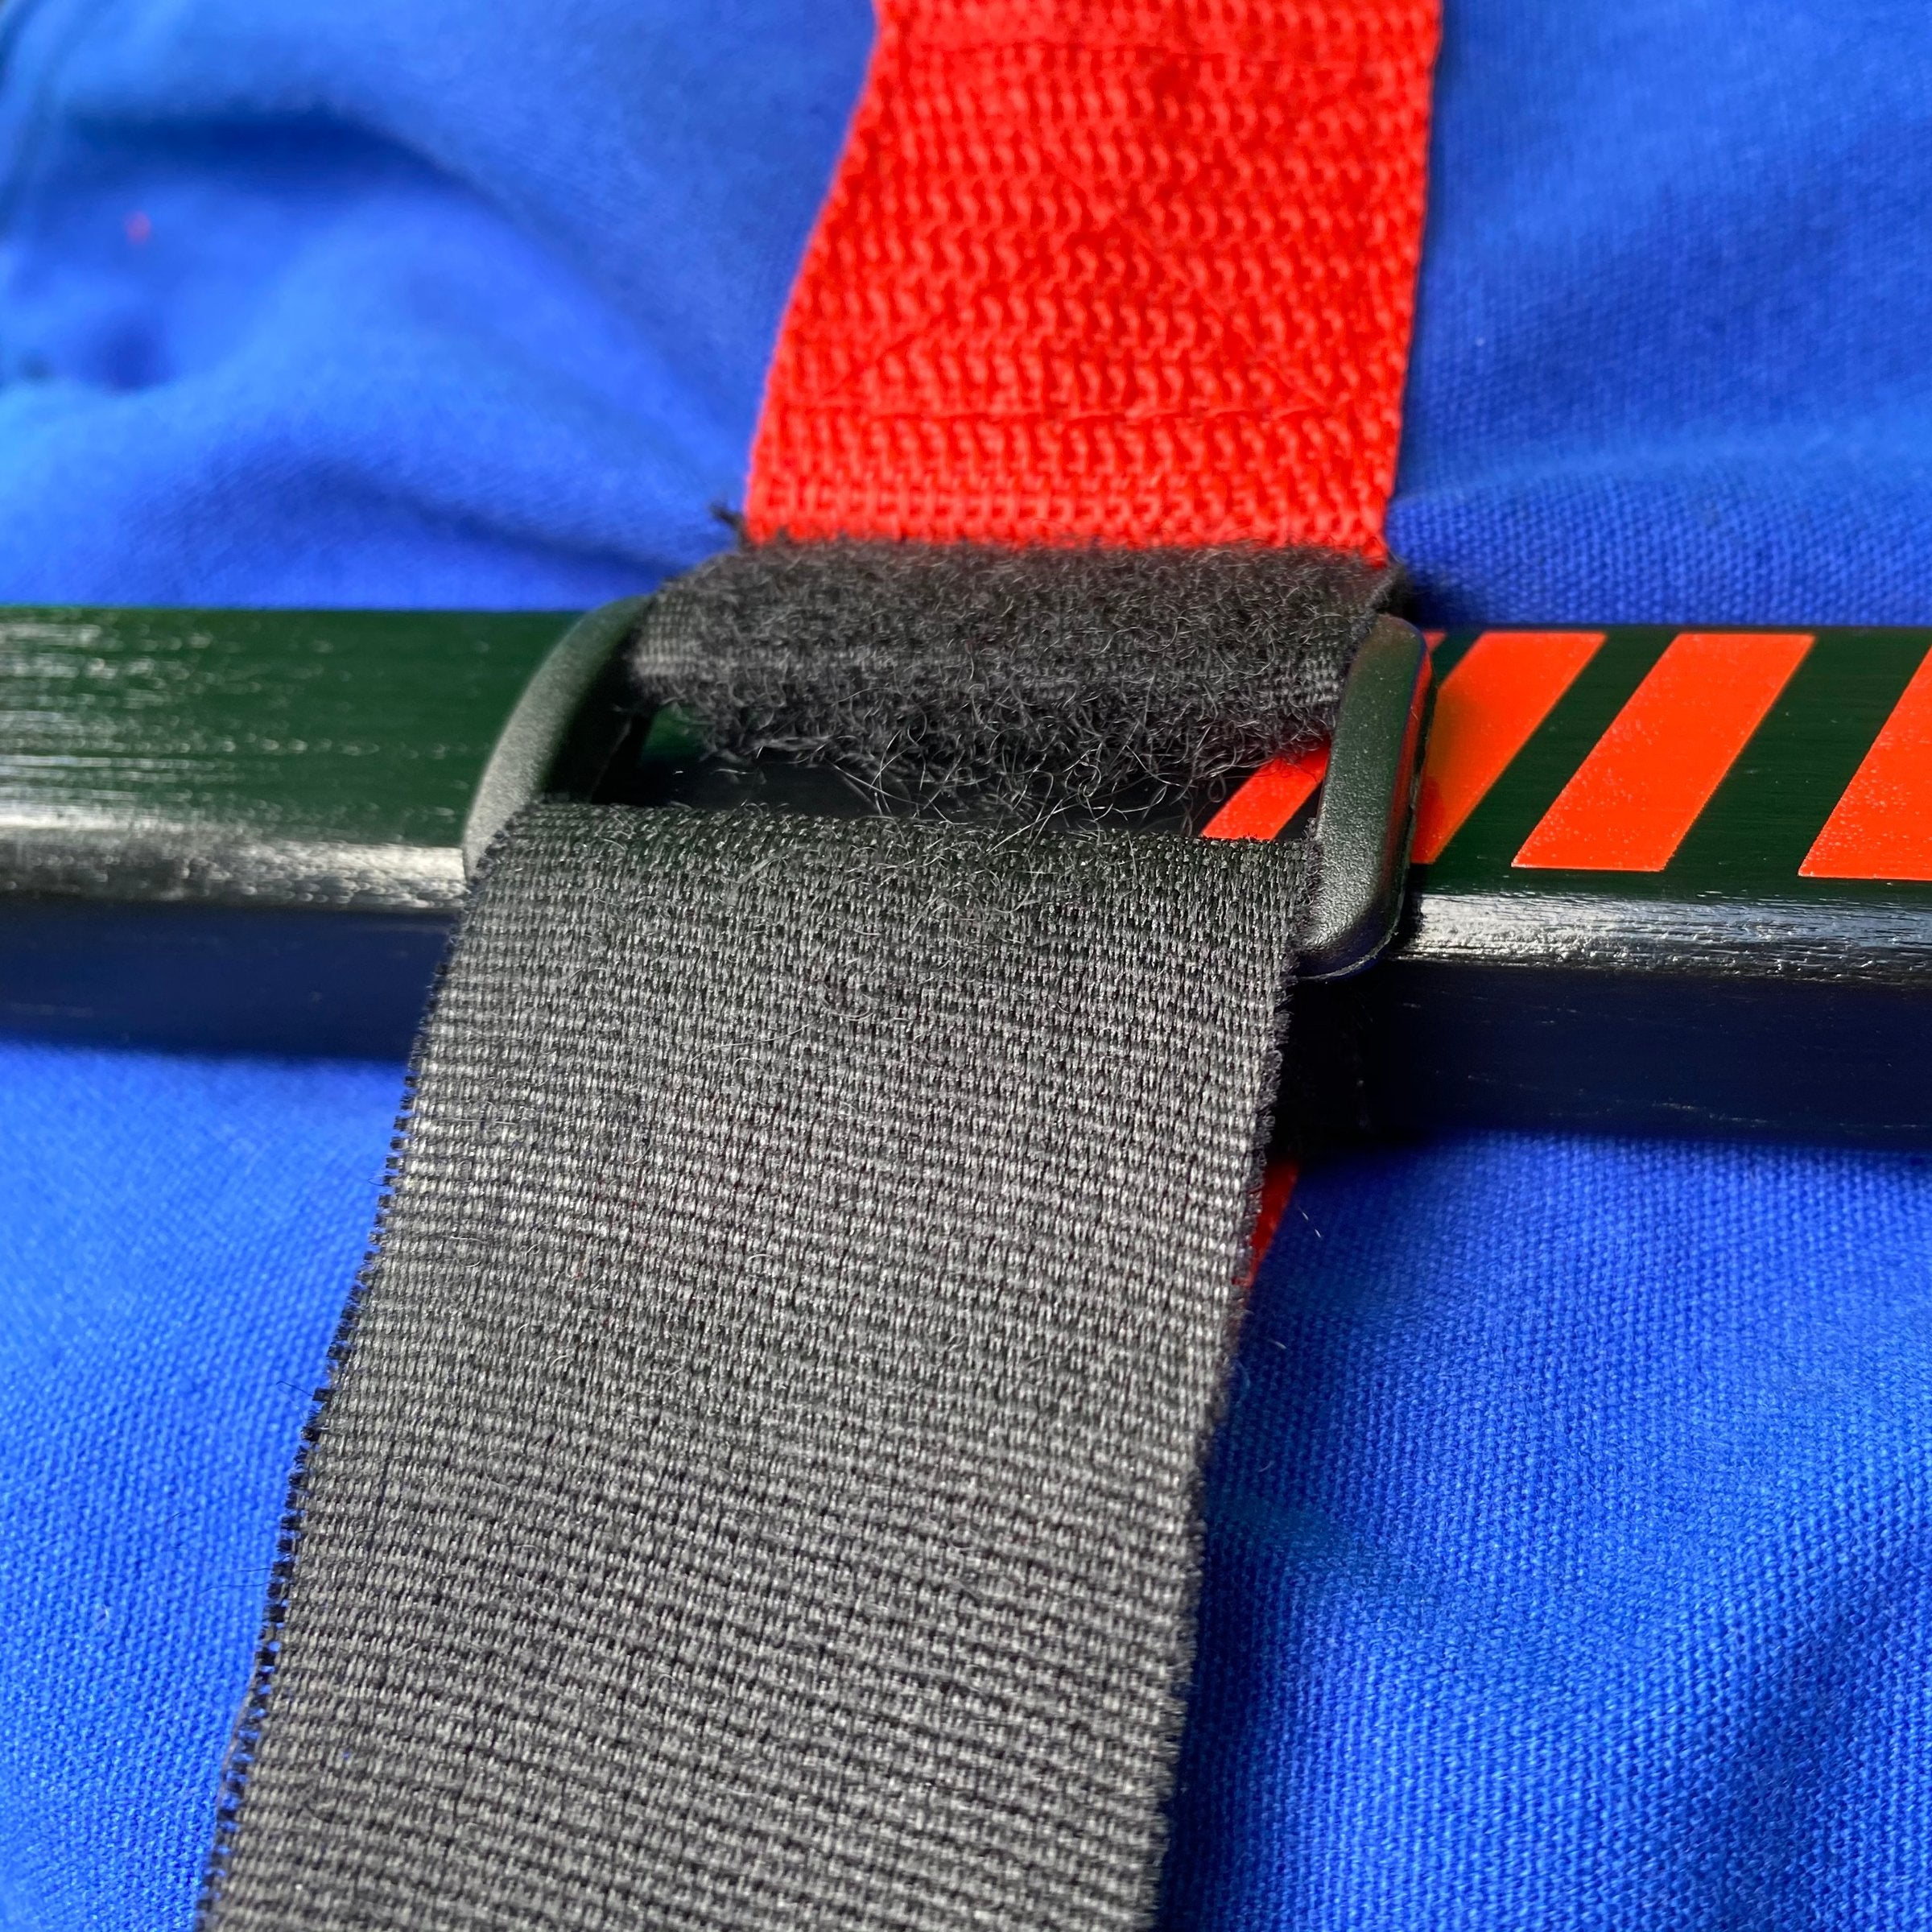 a detailed shot of the Velcro strap